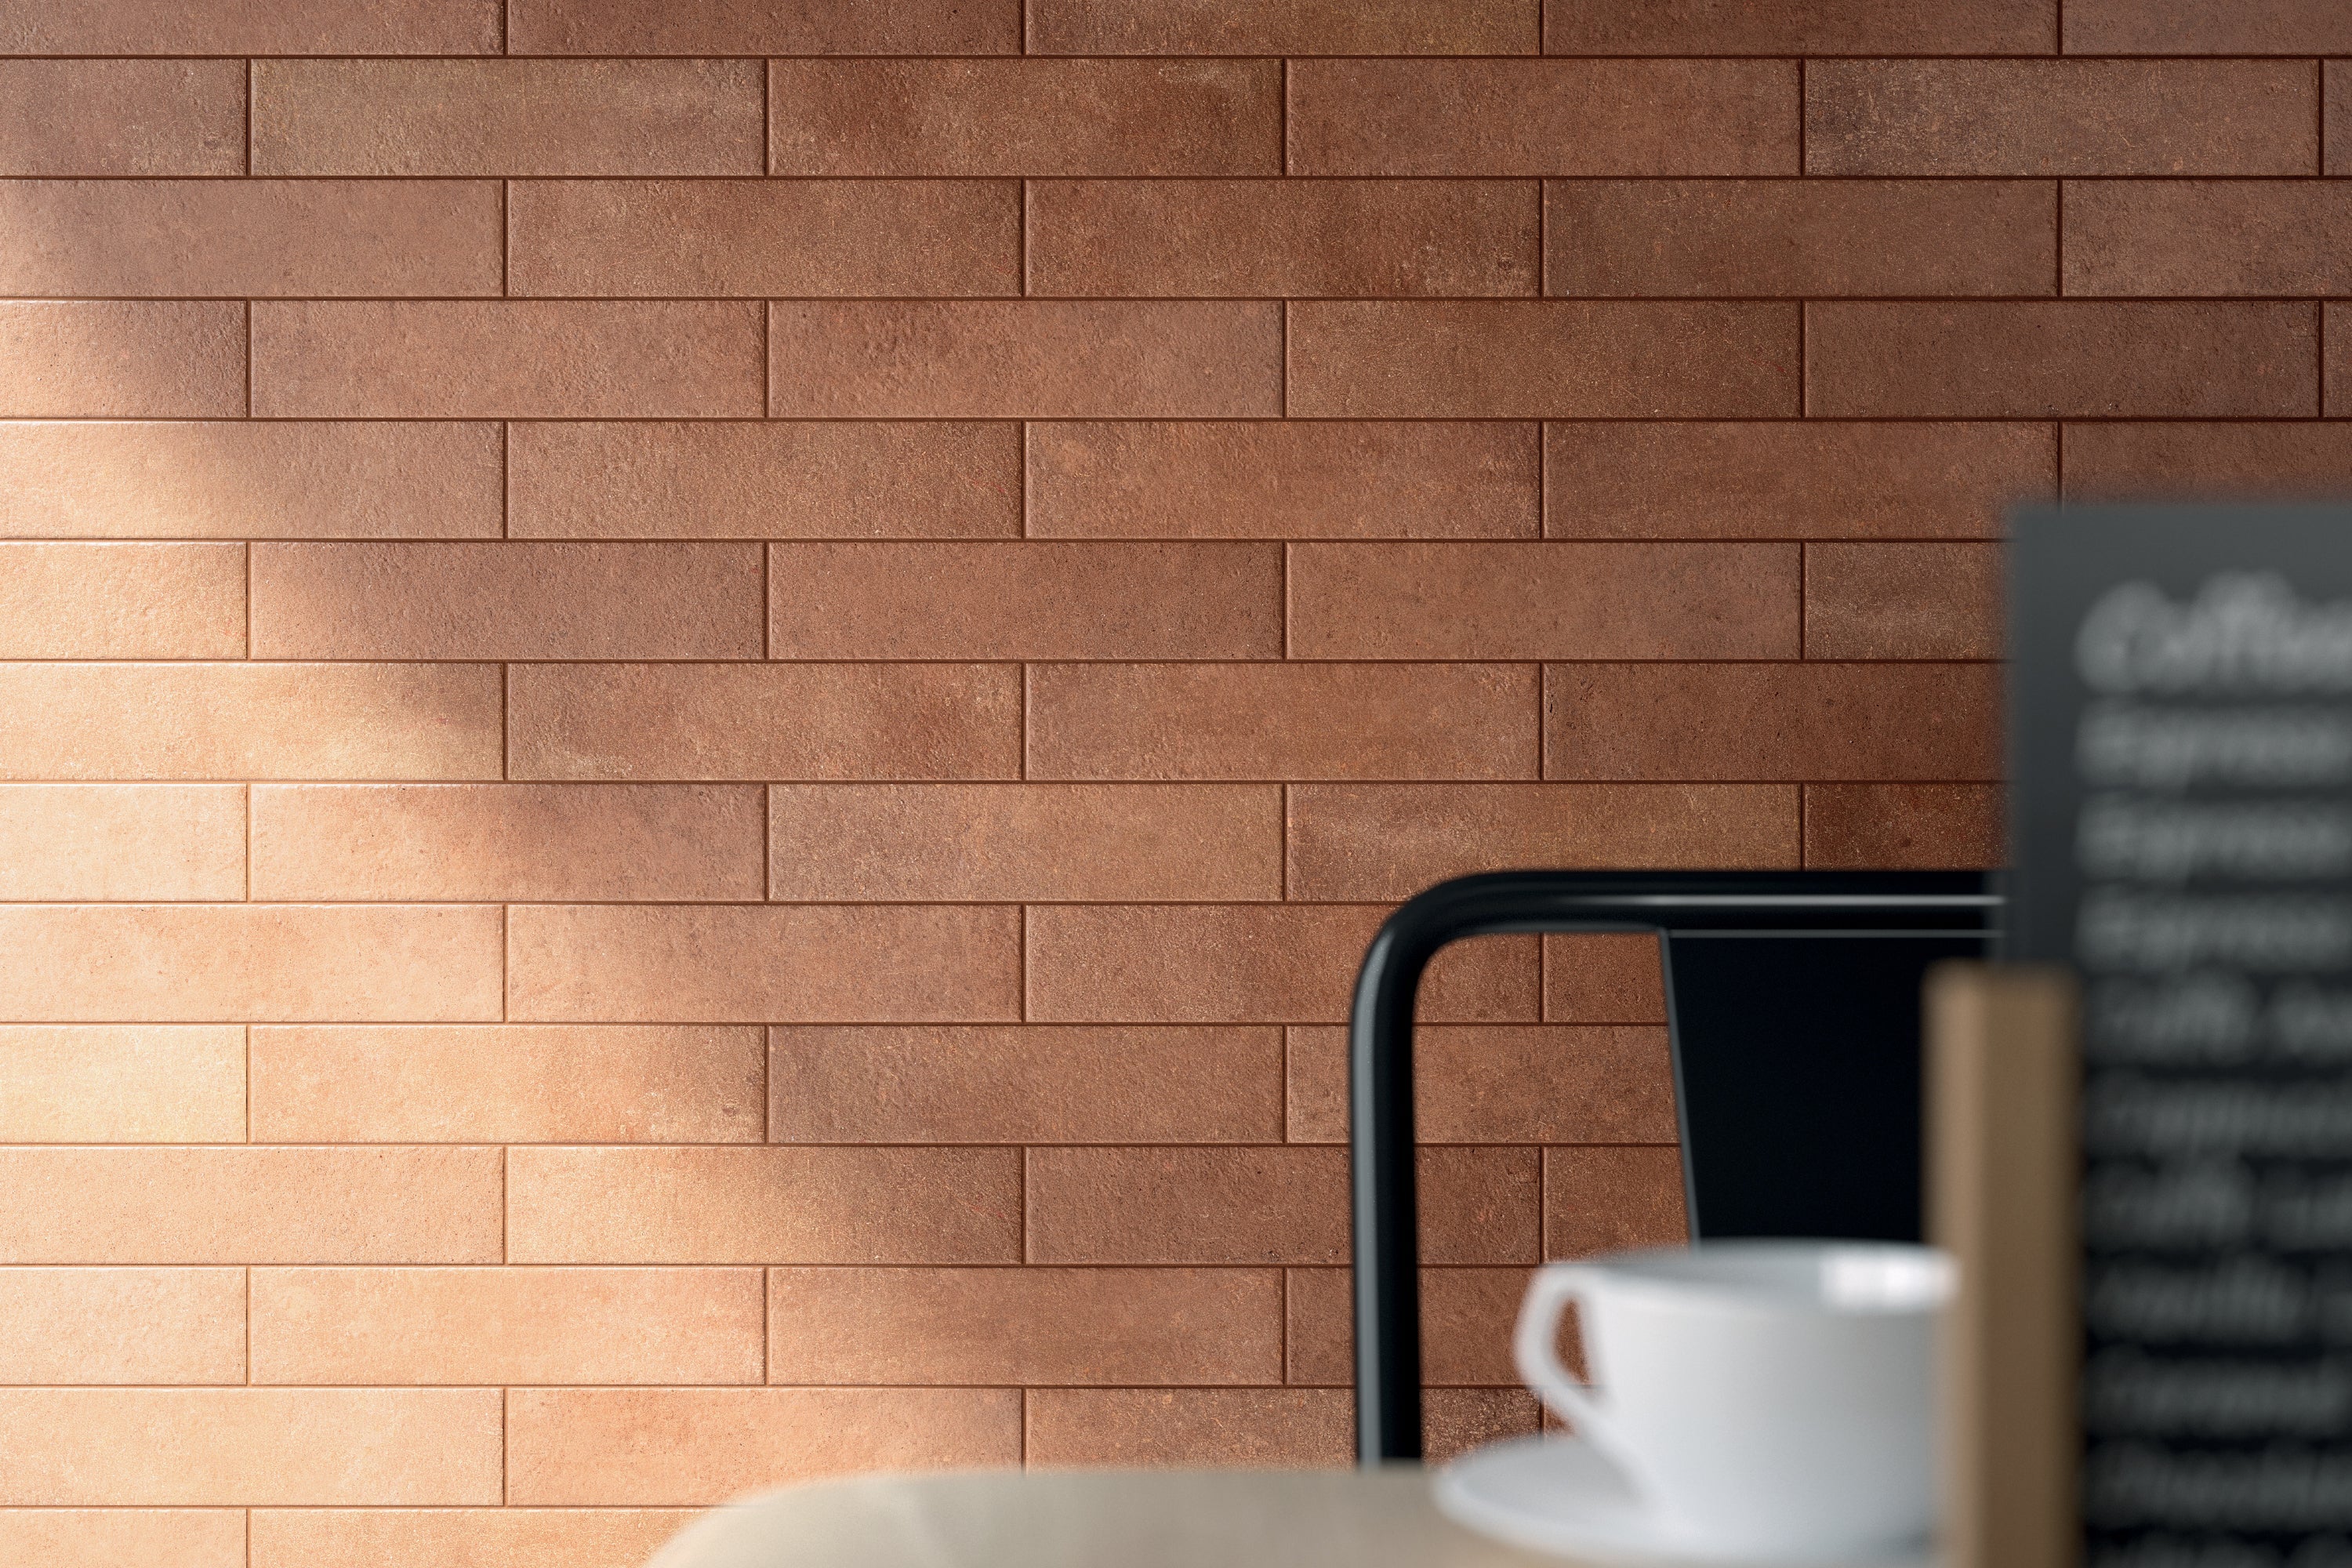 Porcelain tile collection from Surface Group featuring Soho brick-look tiles in warm earth tones displayed in a stylish interior setting.